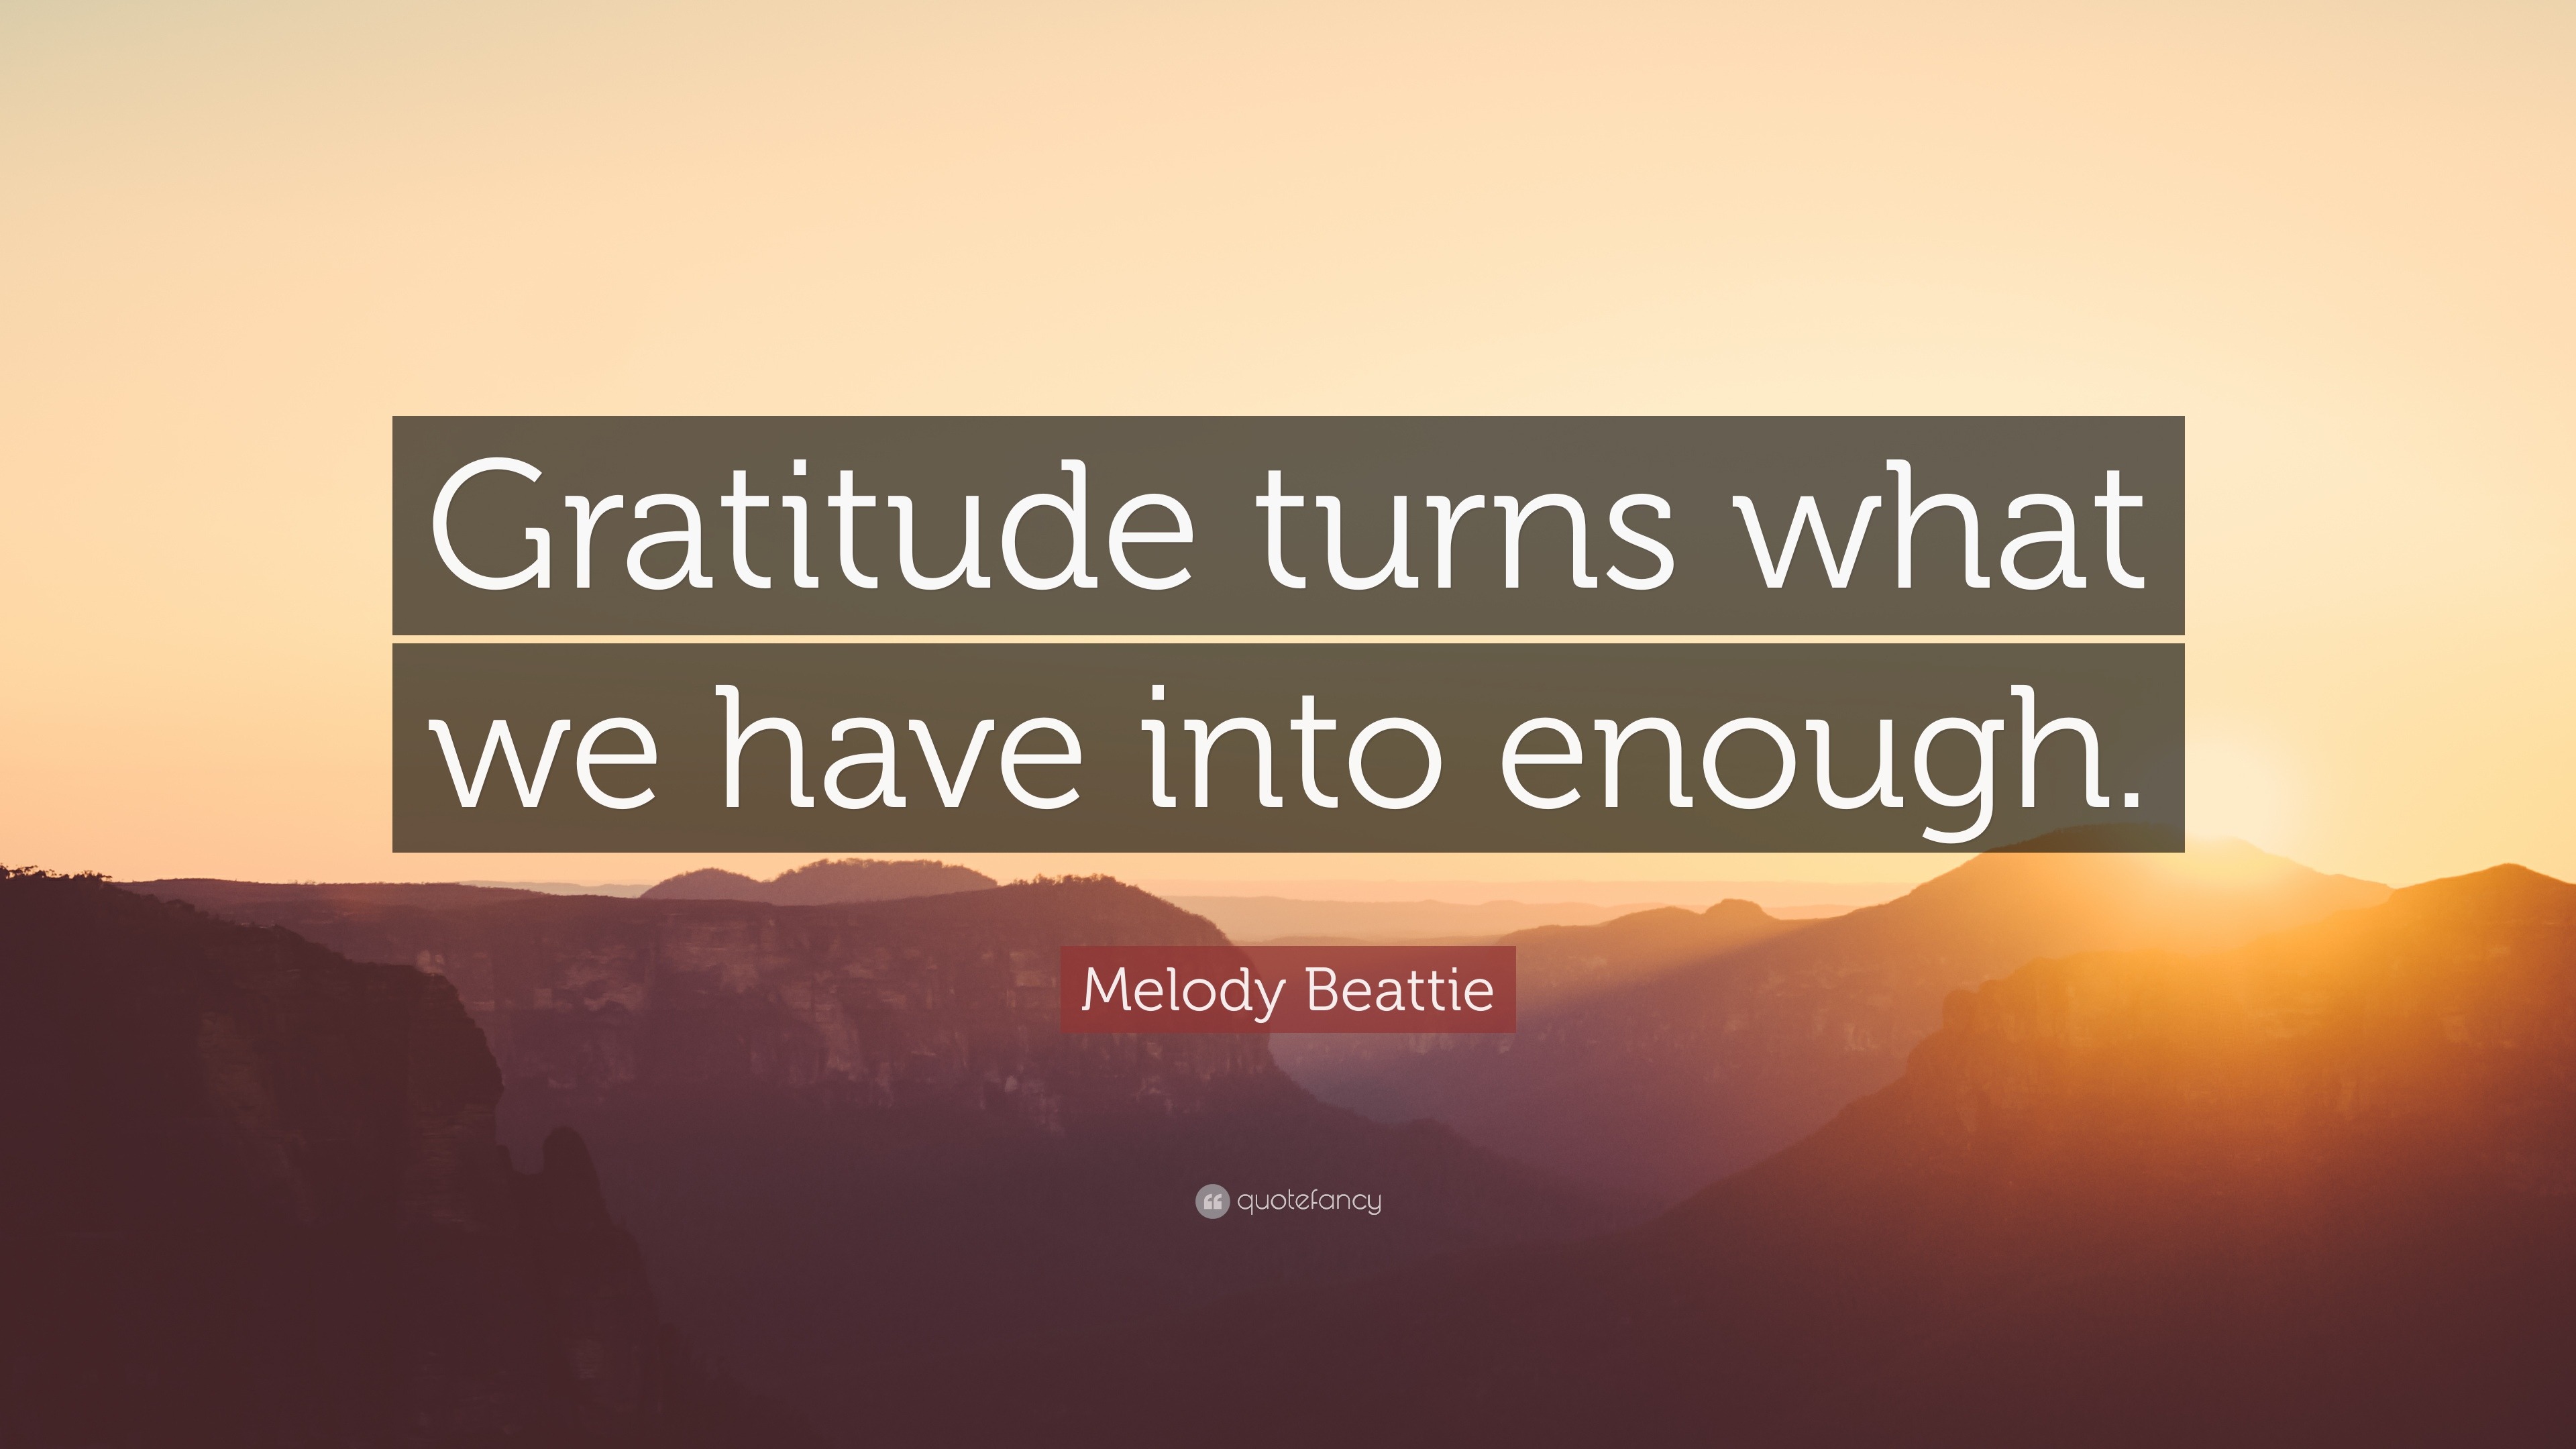 32 Quotes about Gratitude - ActionJacquelyn